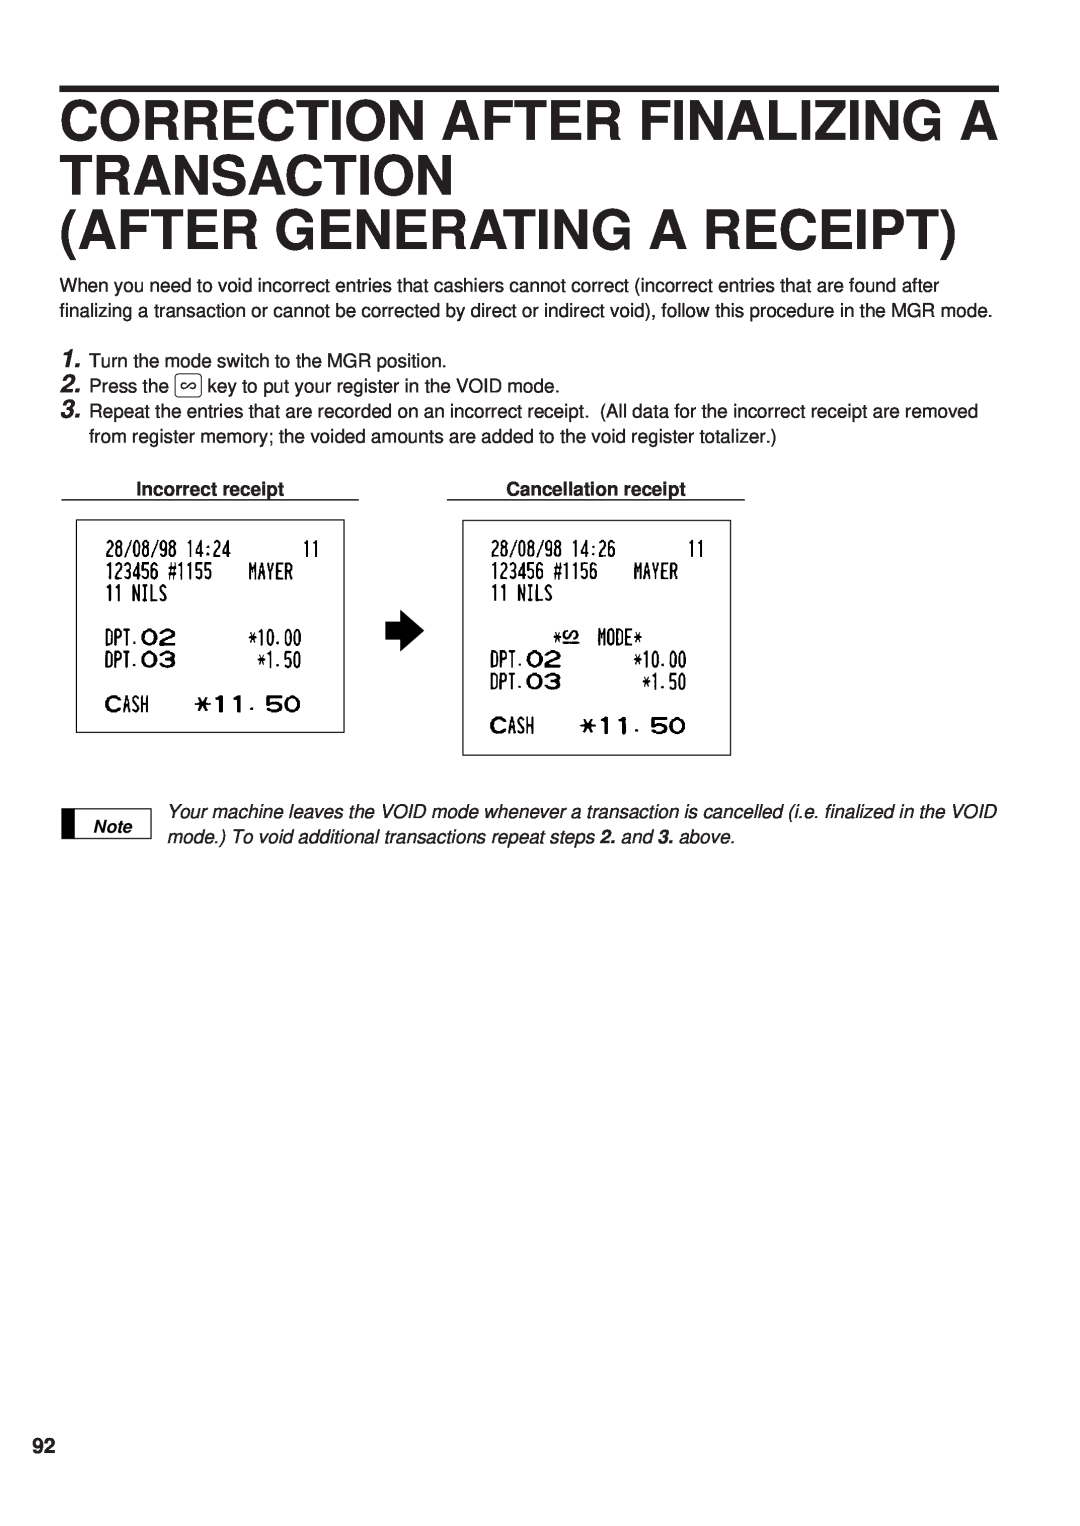 Sharp ER-A450 instruction manual Correction After Finalizing A Transaction After Generating A Receipt, Incorrect receipt 